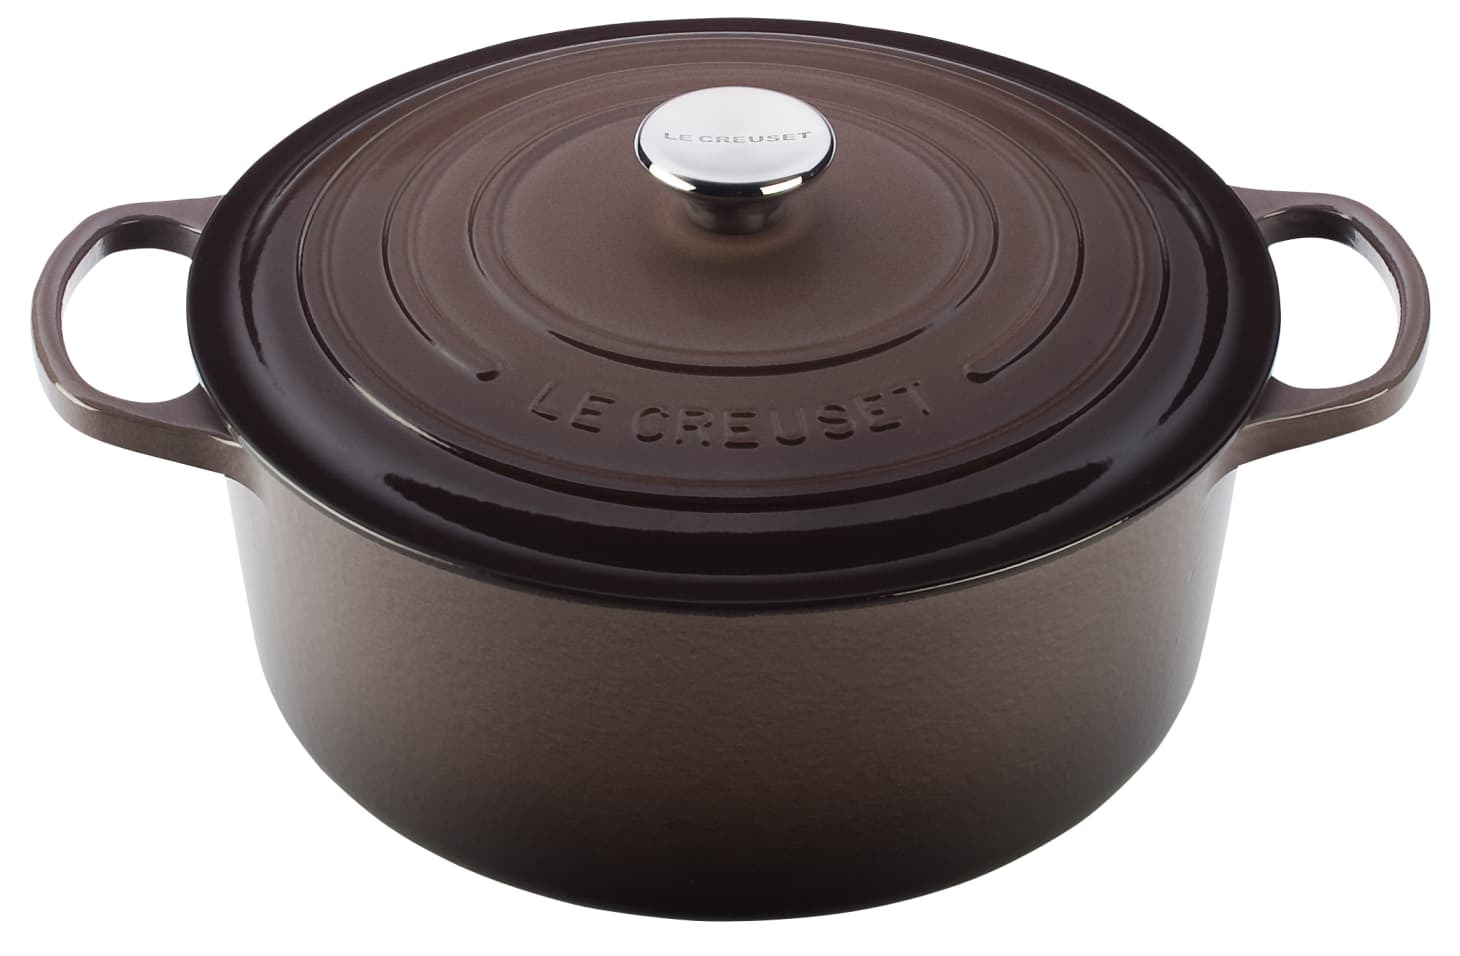 Le Creuset Debuts BrandNew Color "Truffle" for Fall Kitchn